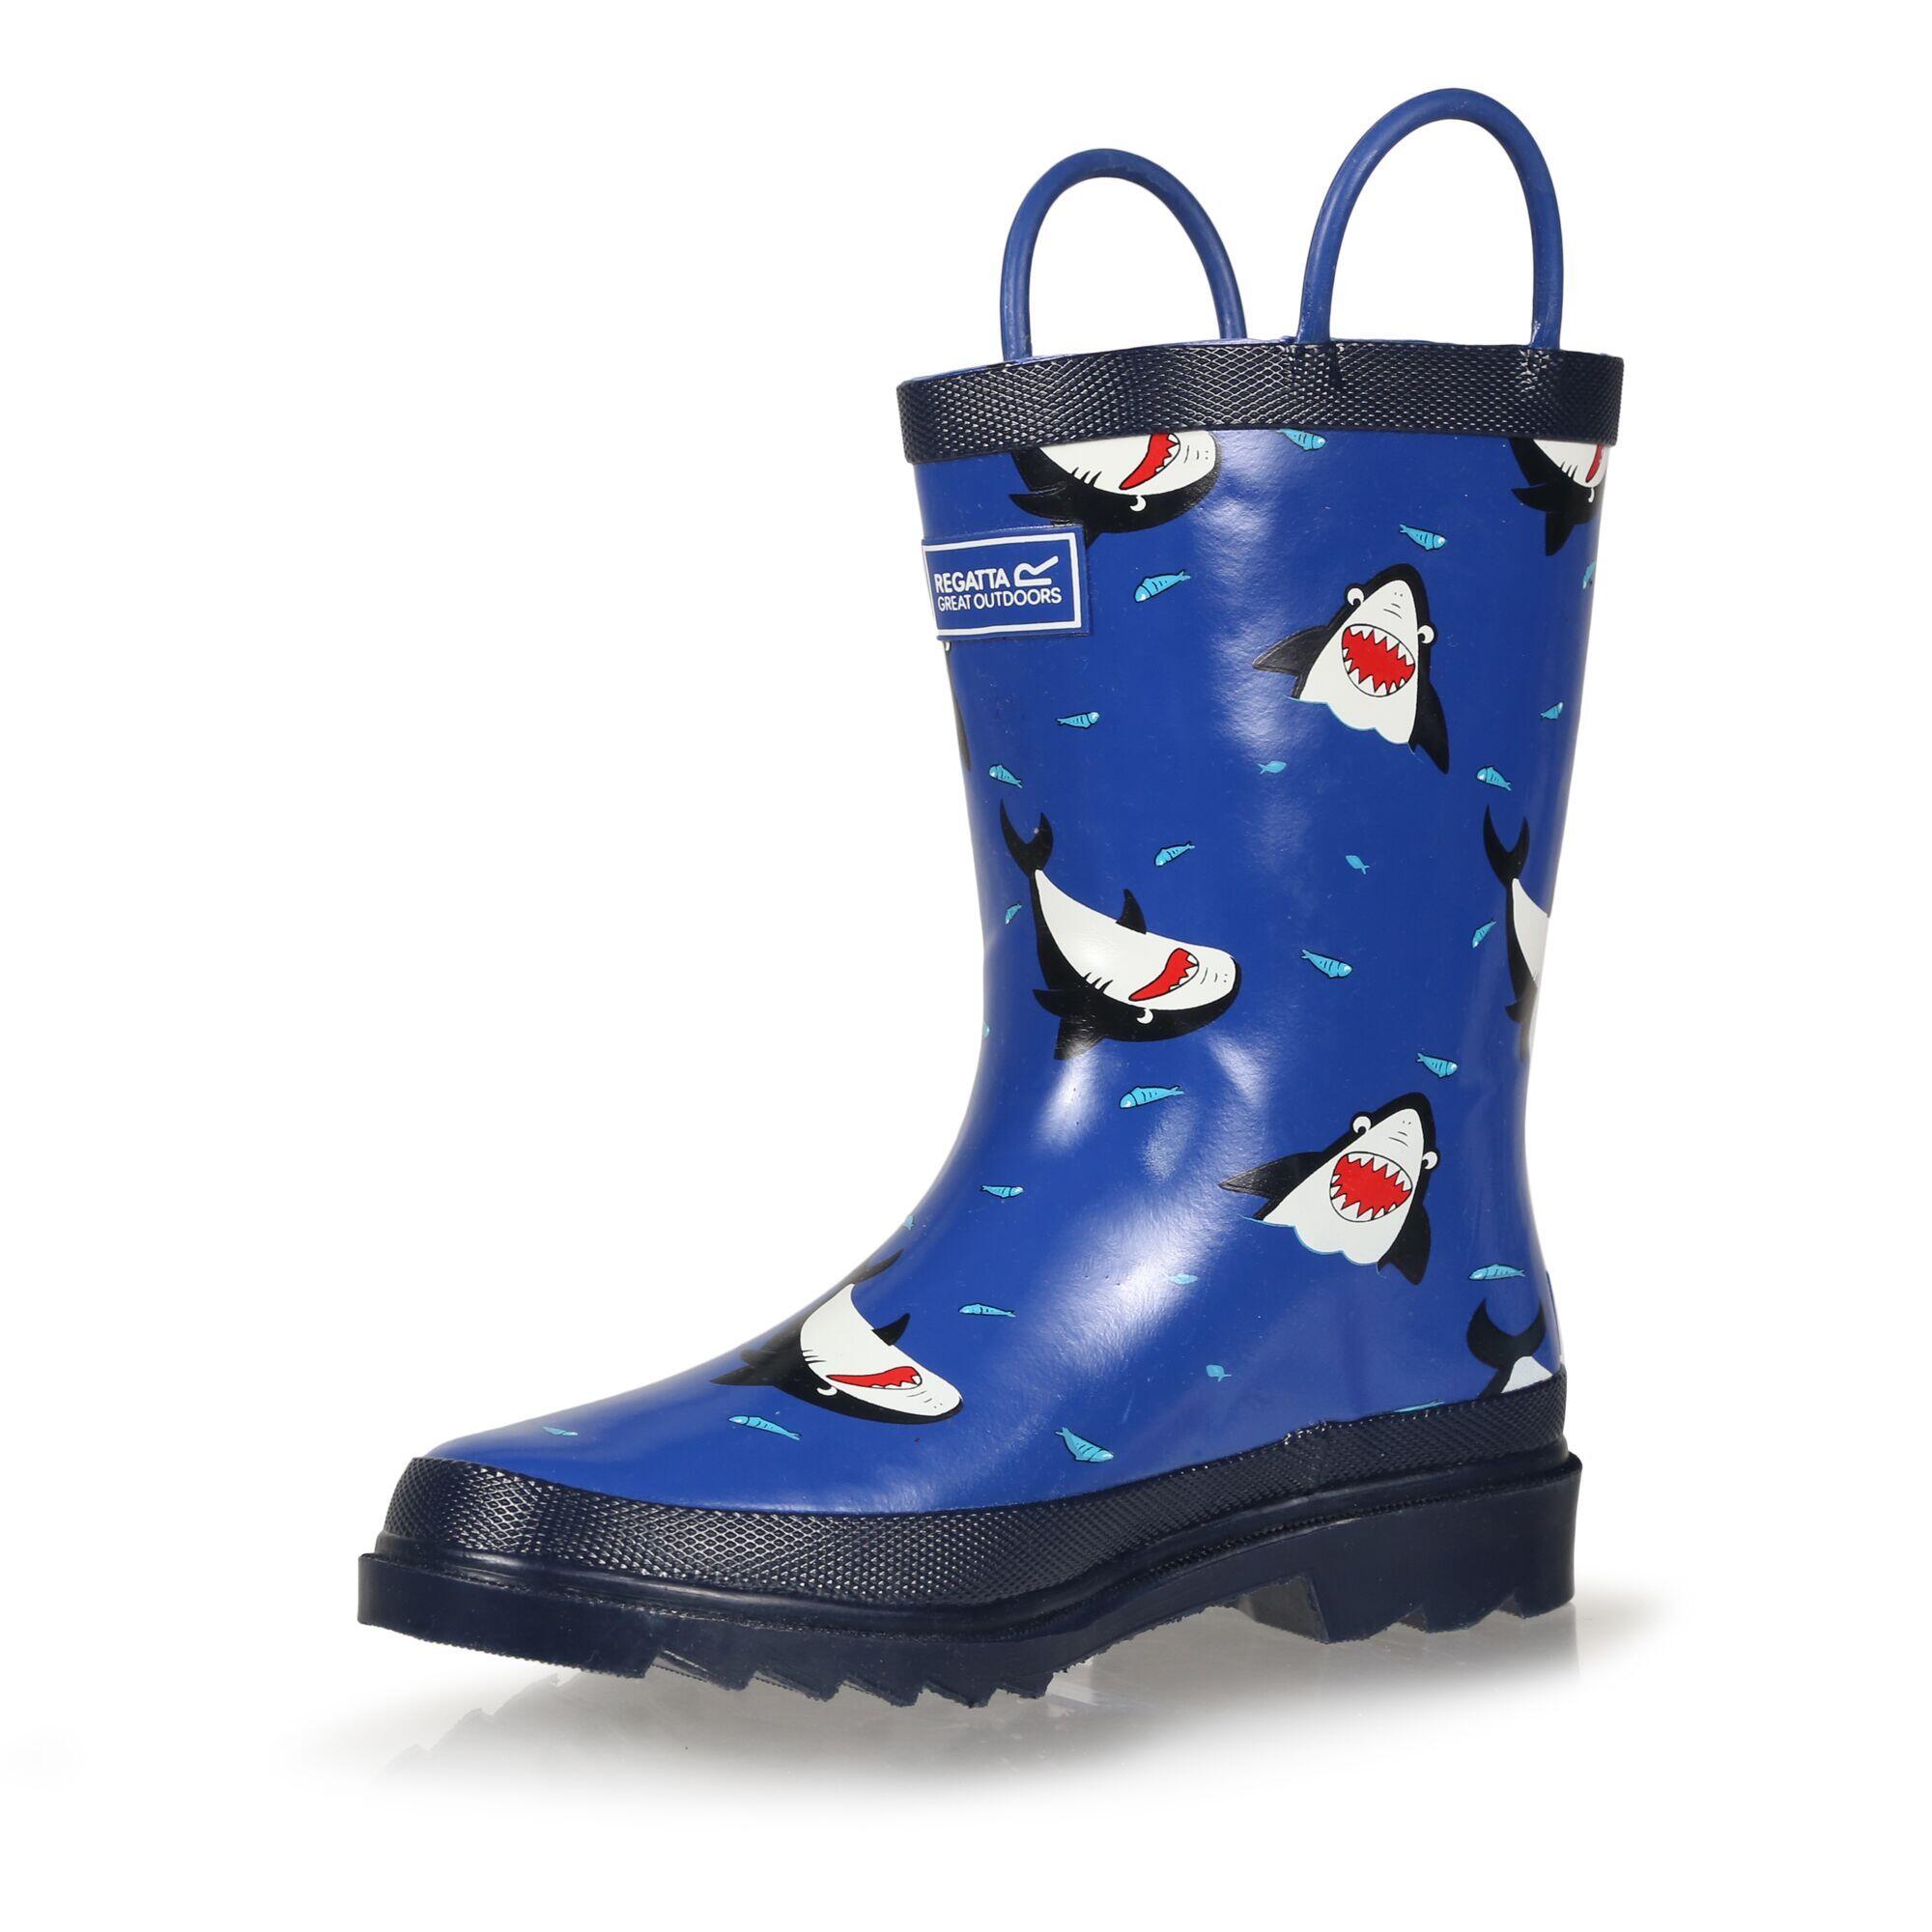 Great Outdoors Childrens/Kids Minnow Patterned Wellington Boots (Sharks/Nautic) 4/5